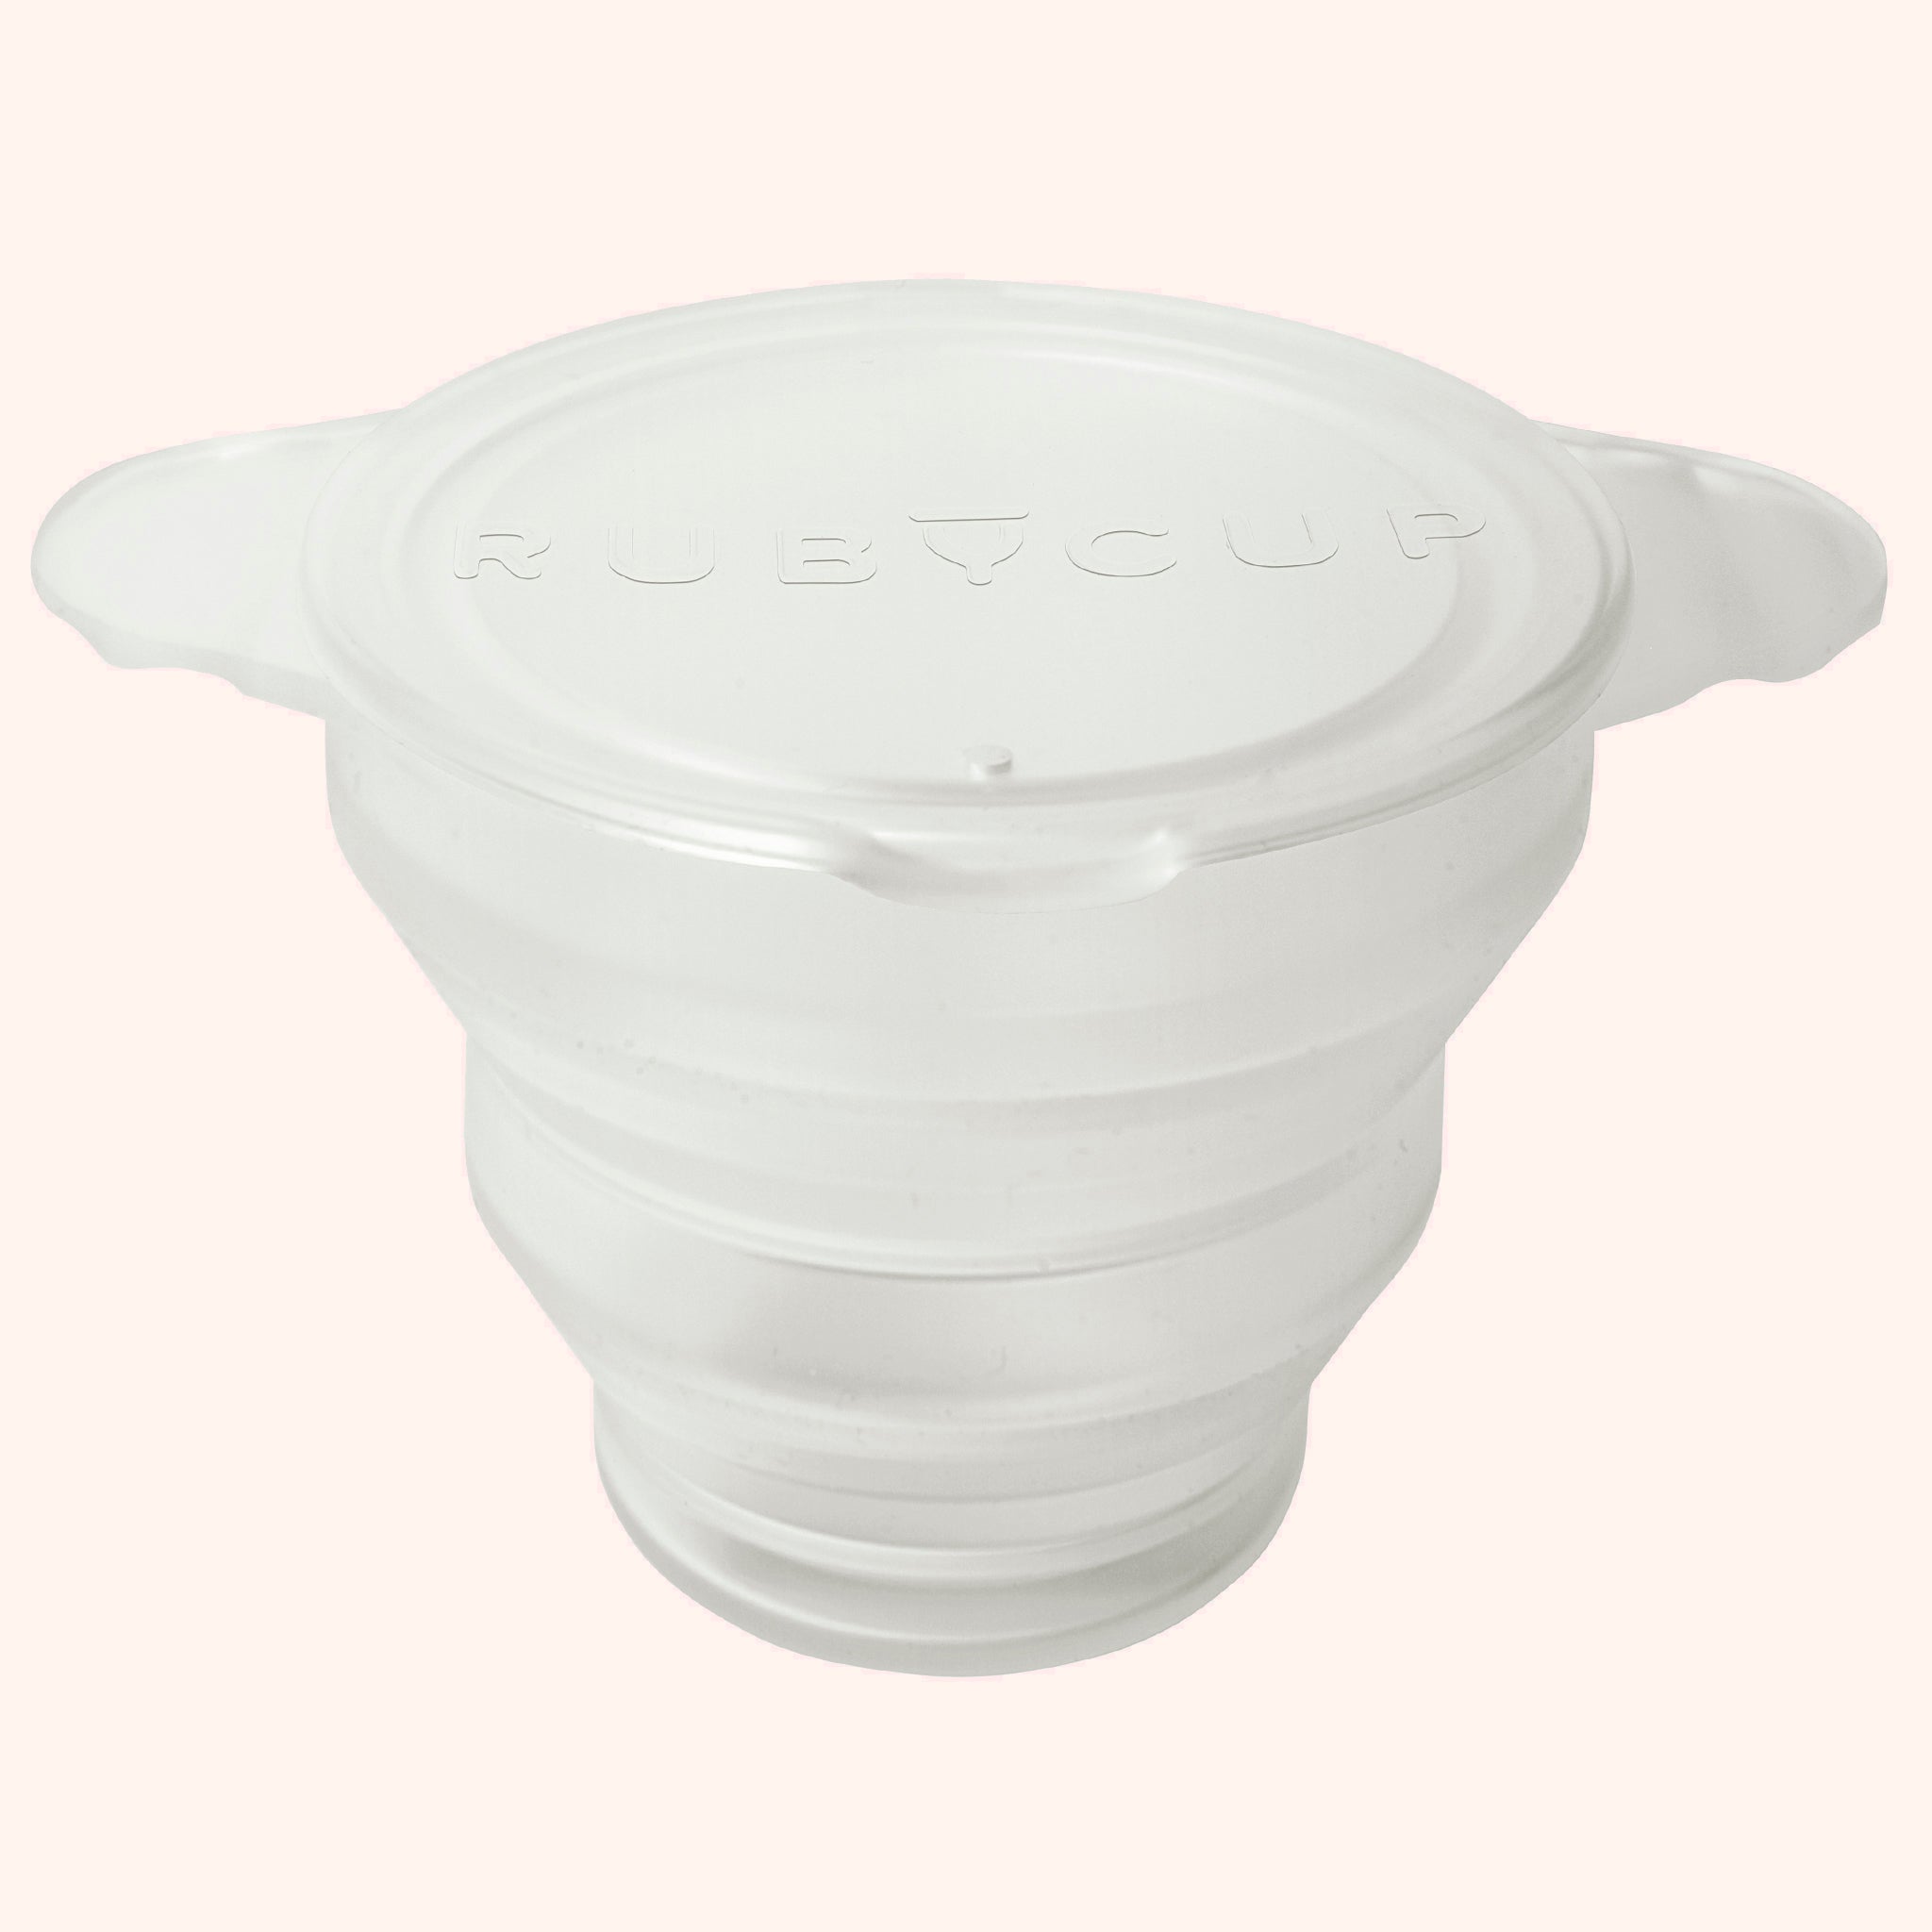 What are the benefits of silicone cup lids?